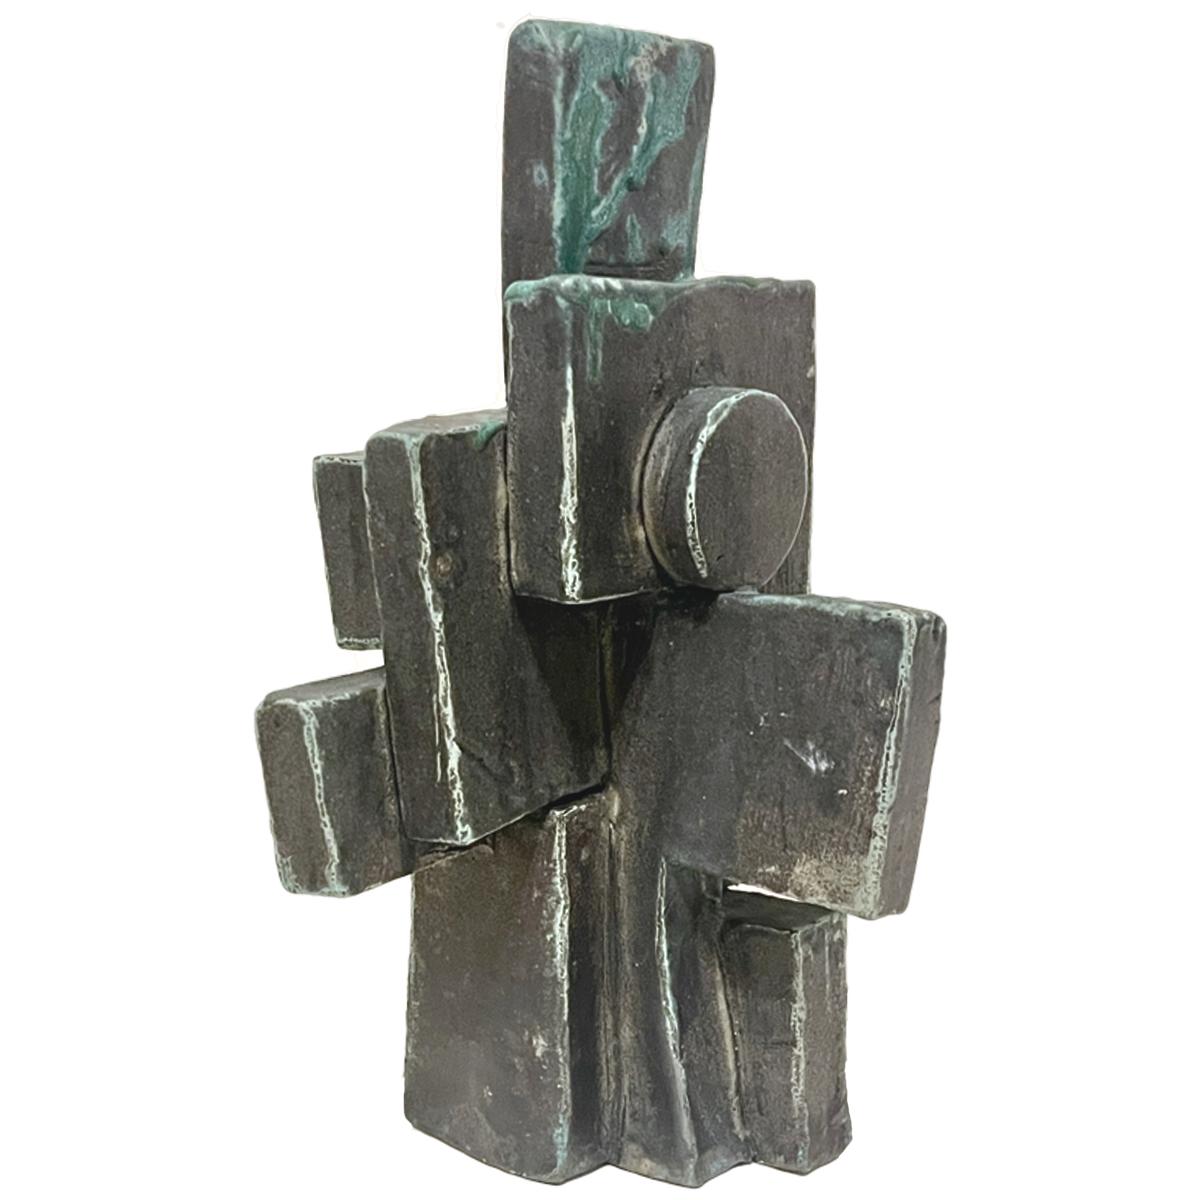 Hand built heavily glazed solid ceramic structure by NY artist Judy Engel. 
Solid slabs create this cubist style sculpture that Engel is recognized for. Greatly influenced by the modernism of the middle of the 20th century, Judy's first introduction